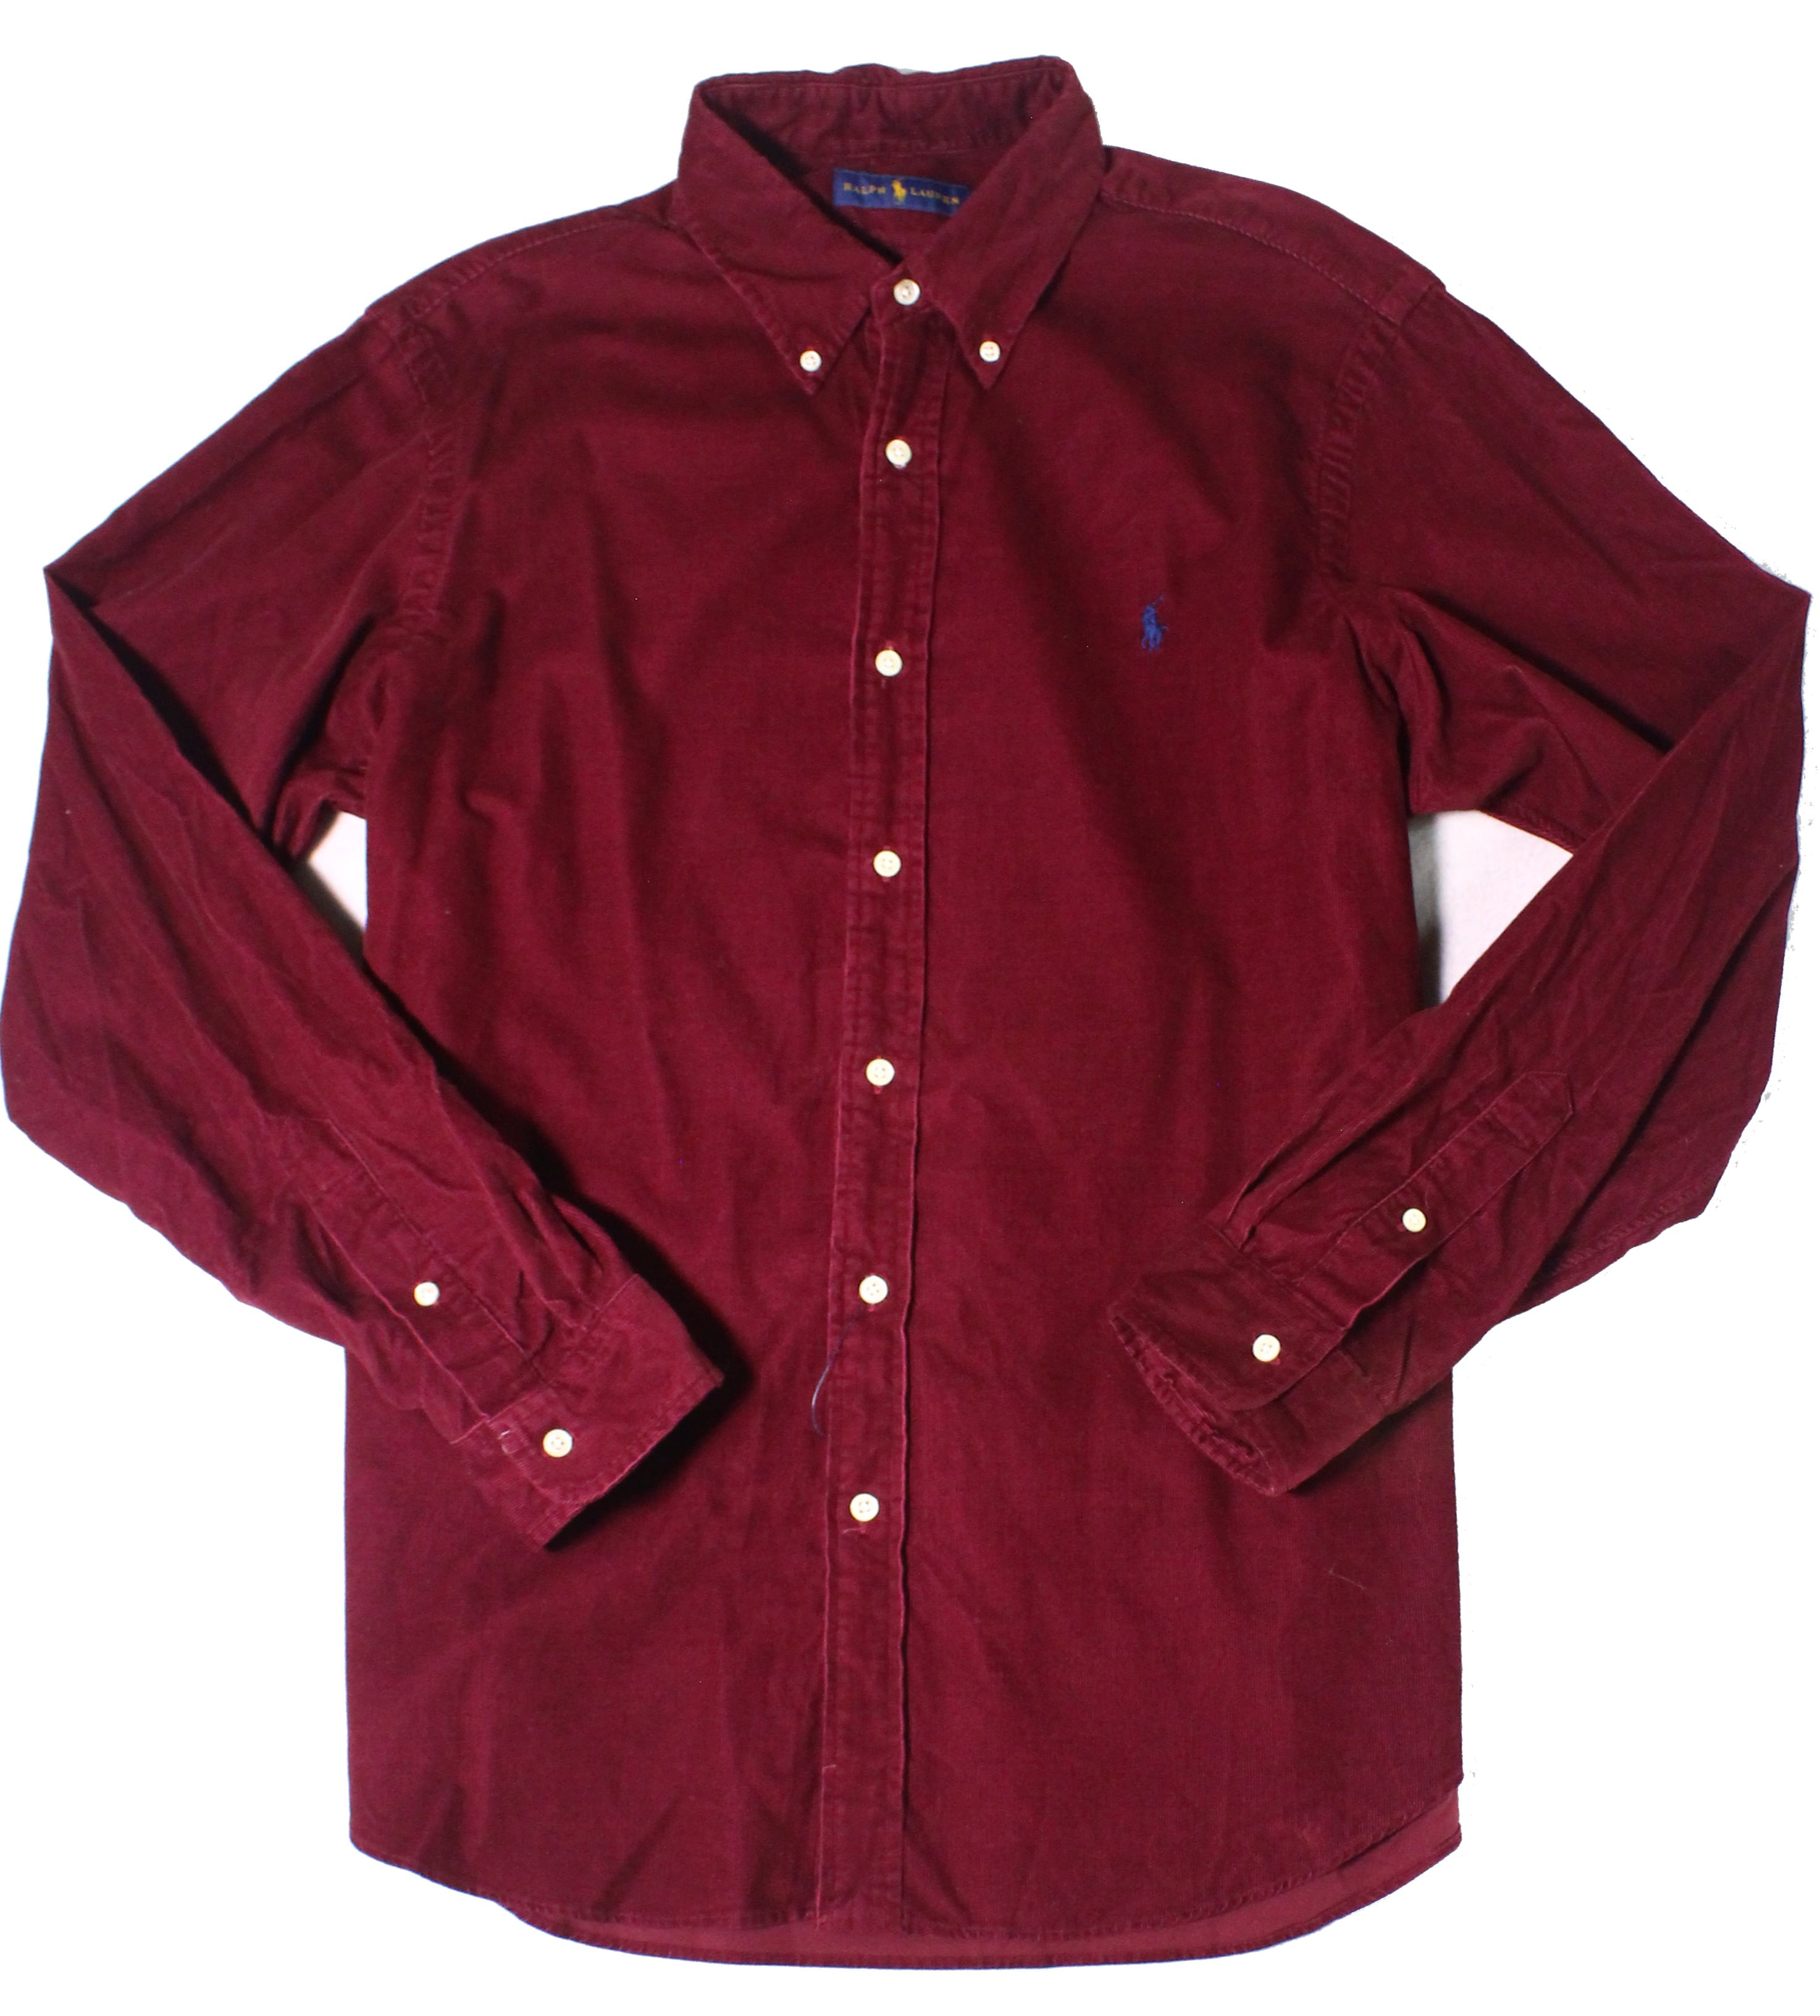 red button up shirt mens long sleeve